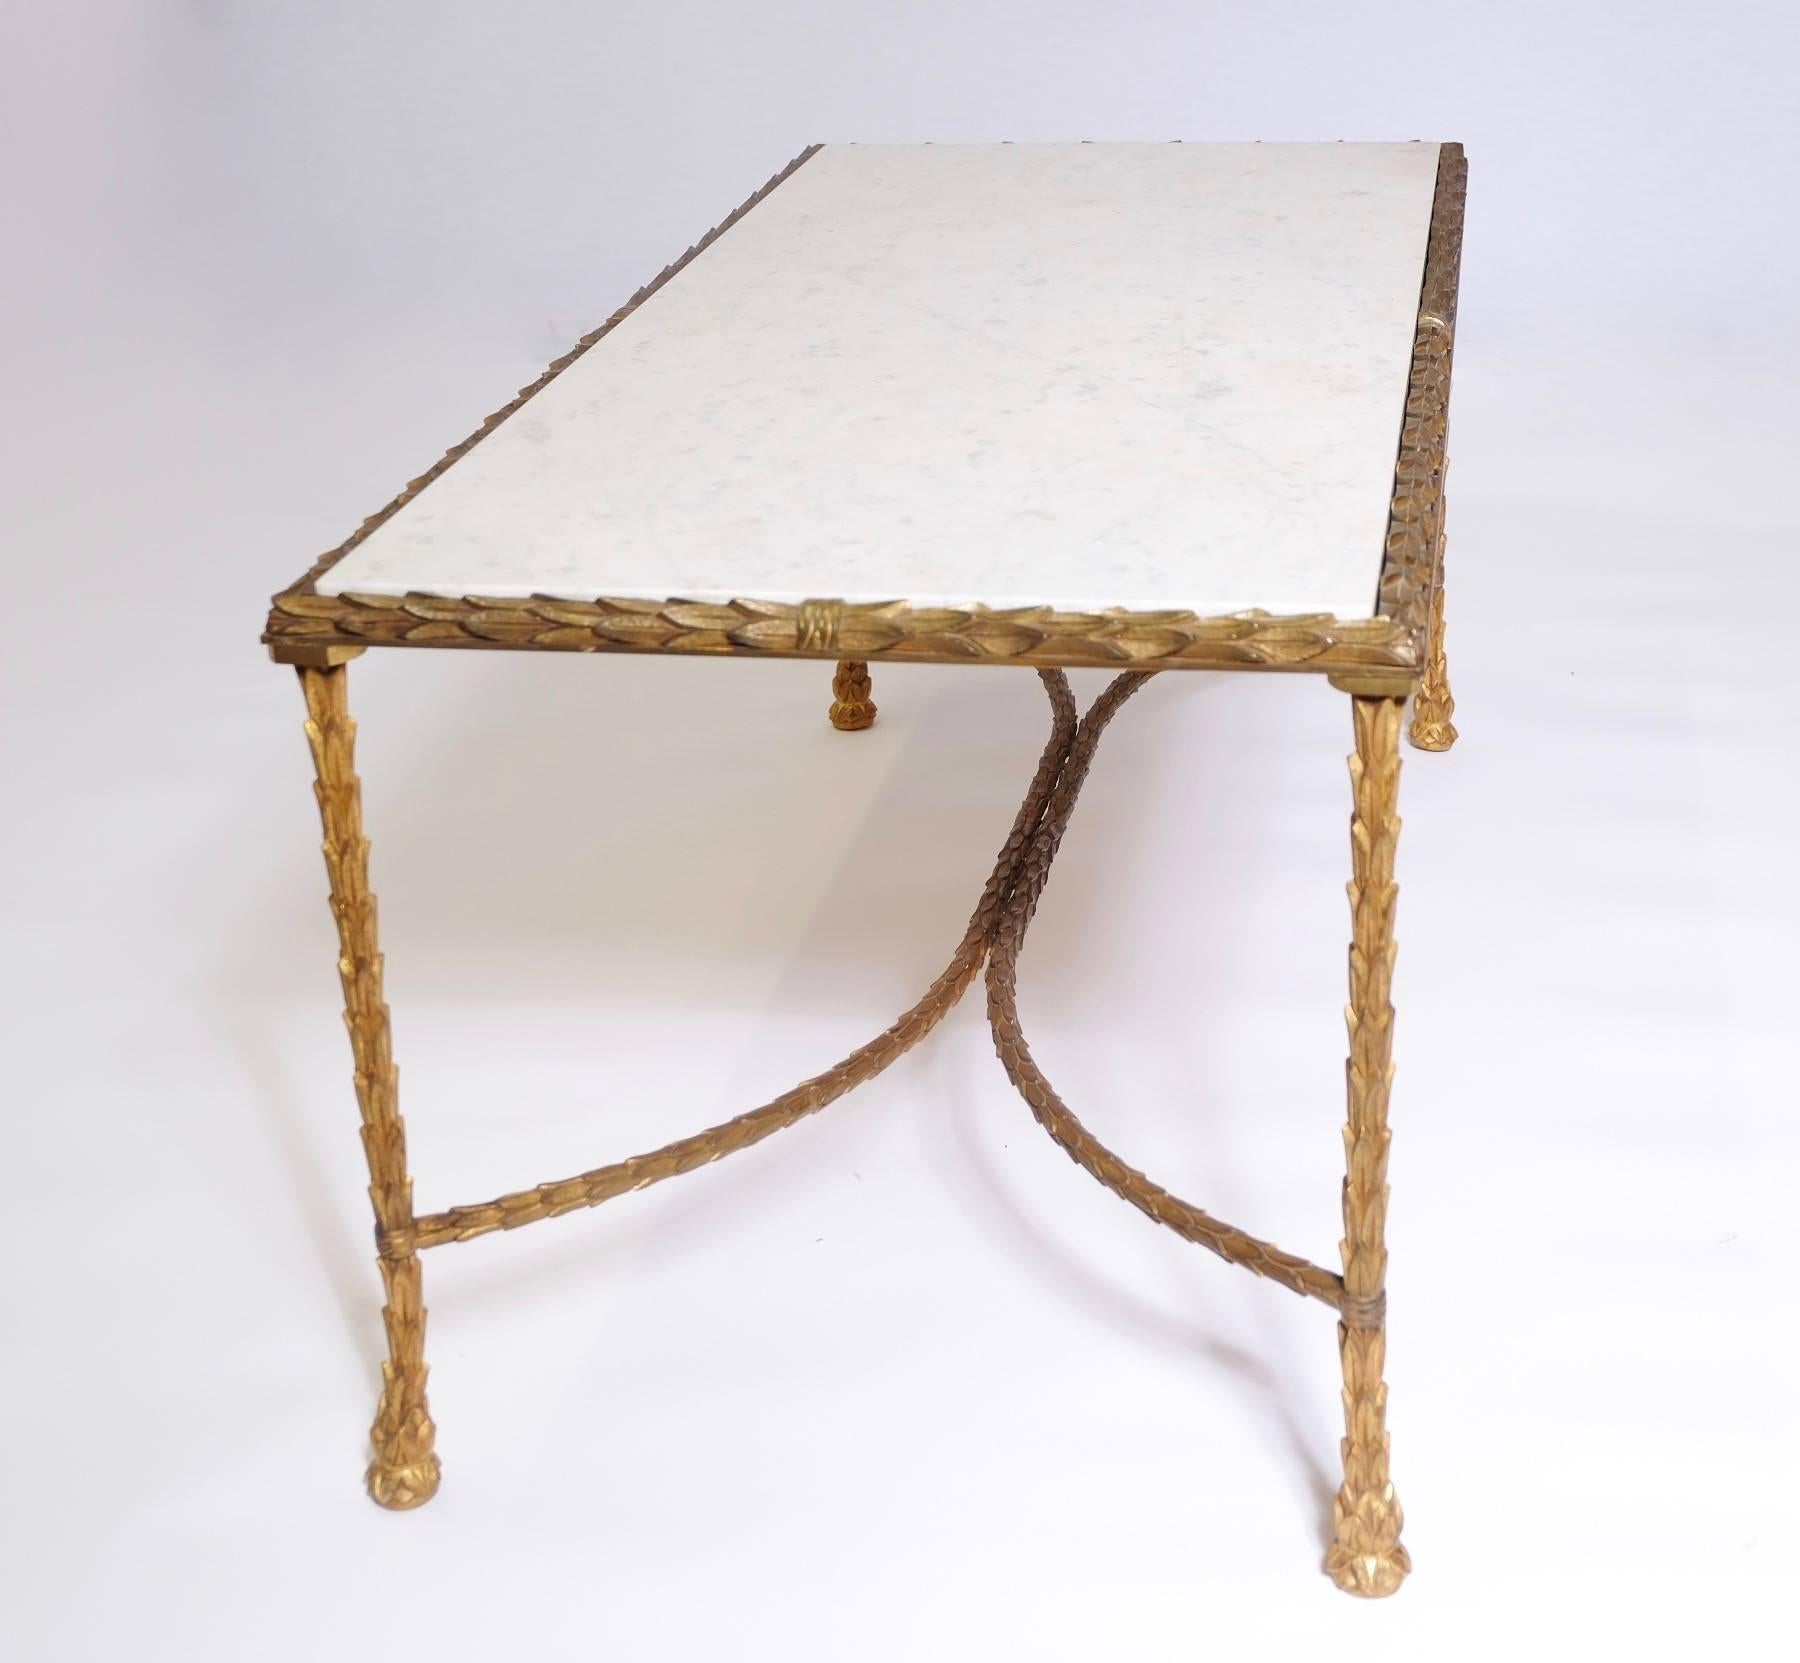 Coffee table by Maison Baguès in gilt bronze, white original marble top.

Since its establishment in 1860, the Maison Baguès has been an emblem of French sophistication in luxury lighting design. Each piece the firm makes is hand assembled using